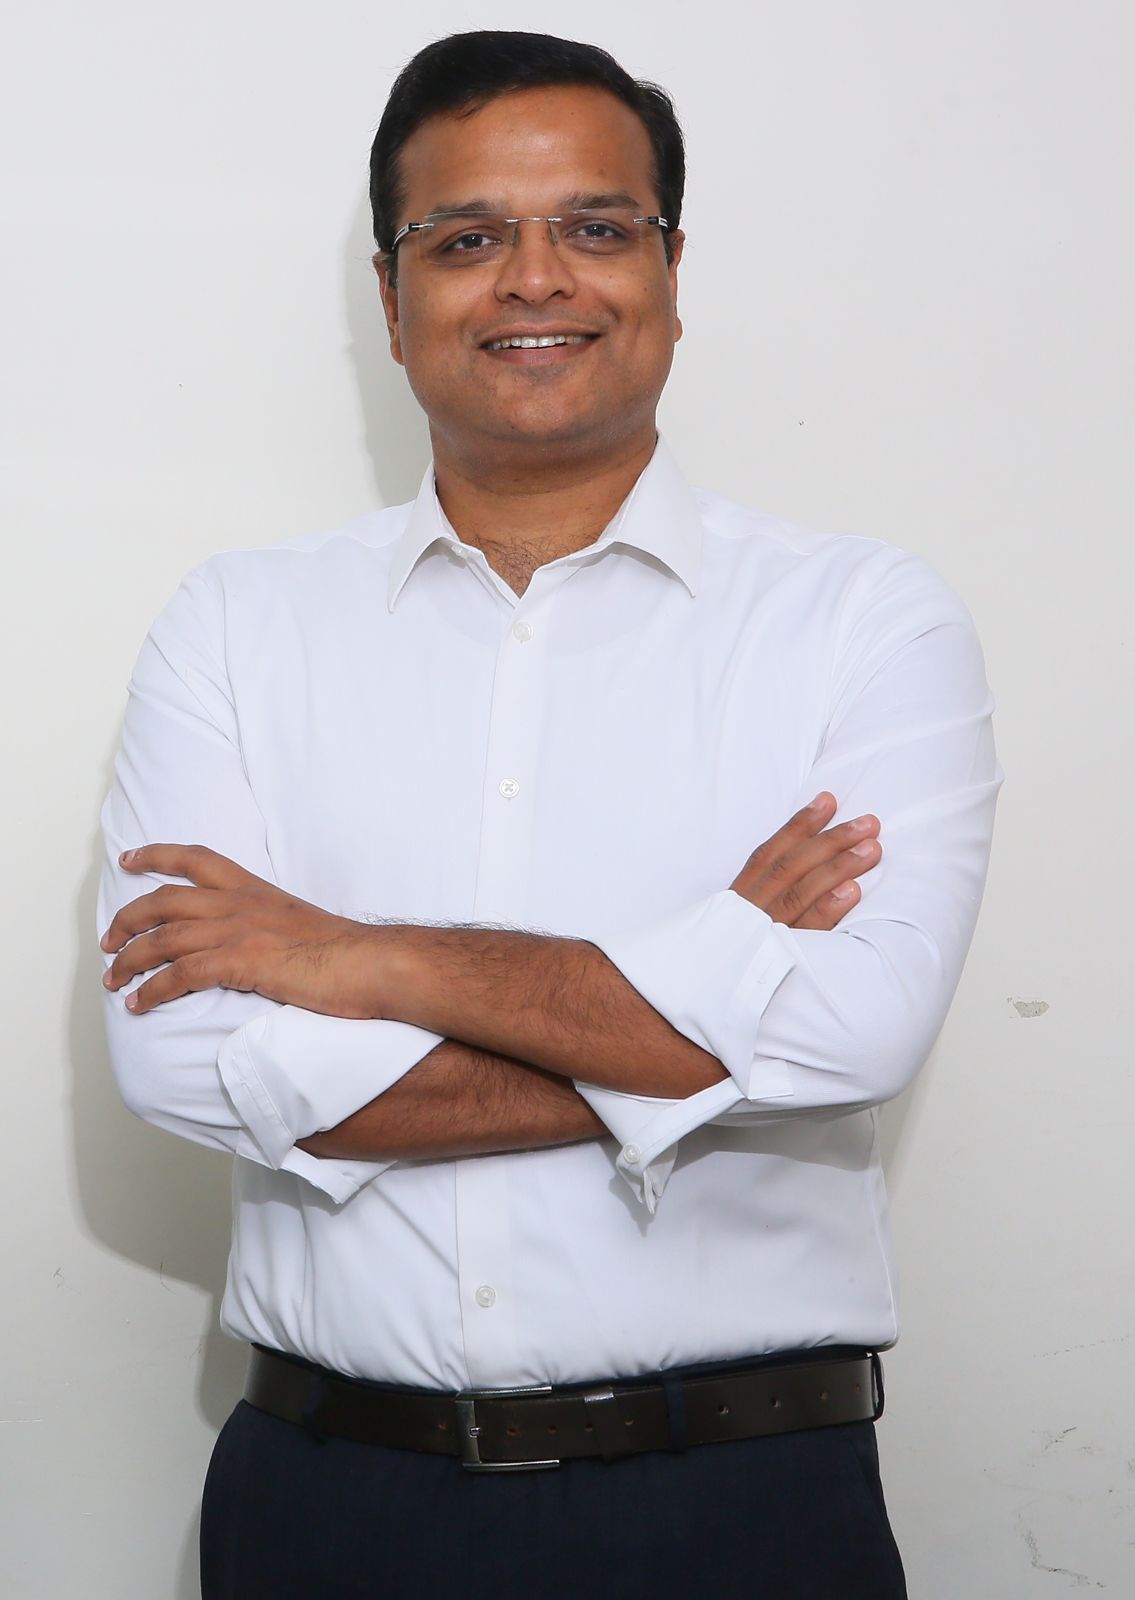 Amit singh - Founder and CEO of TelioLabs